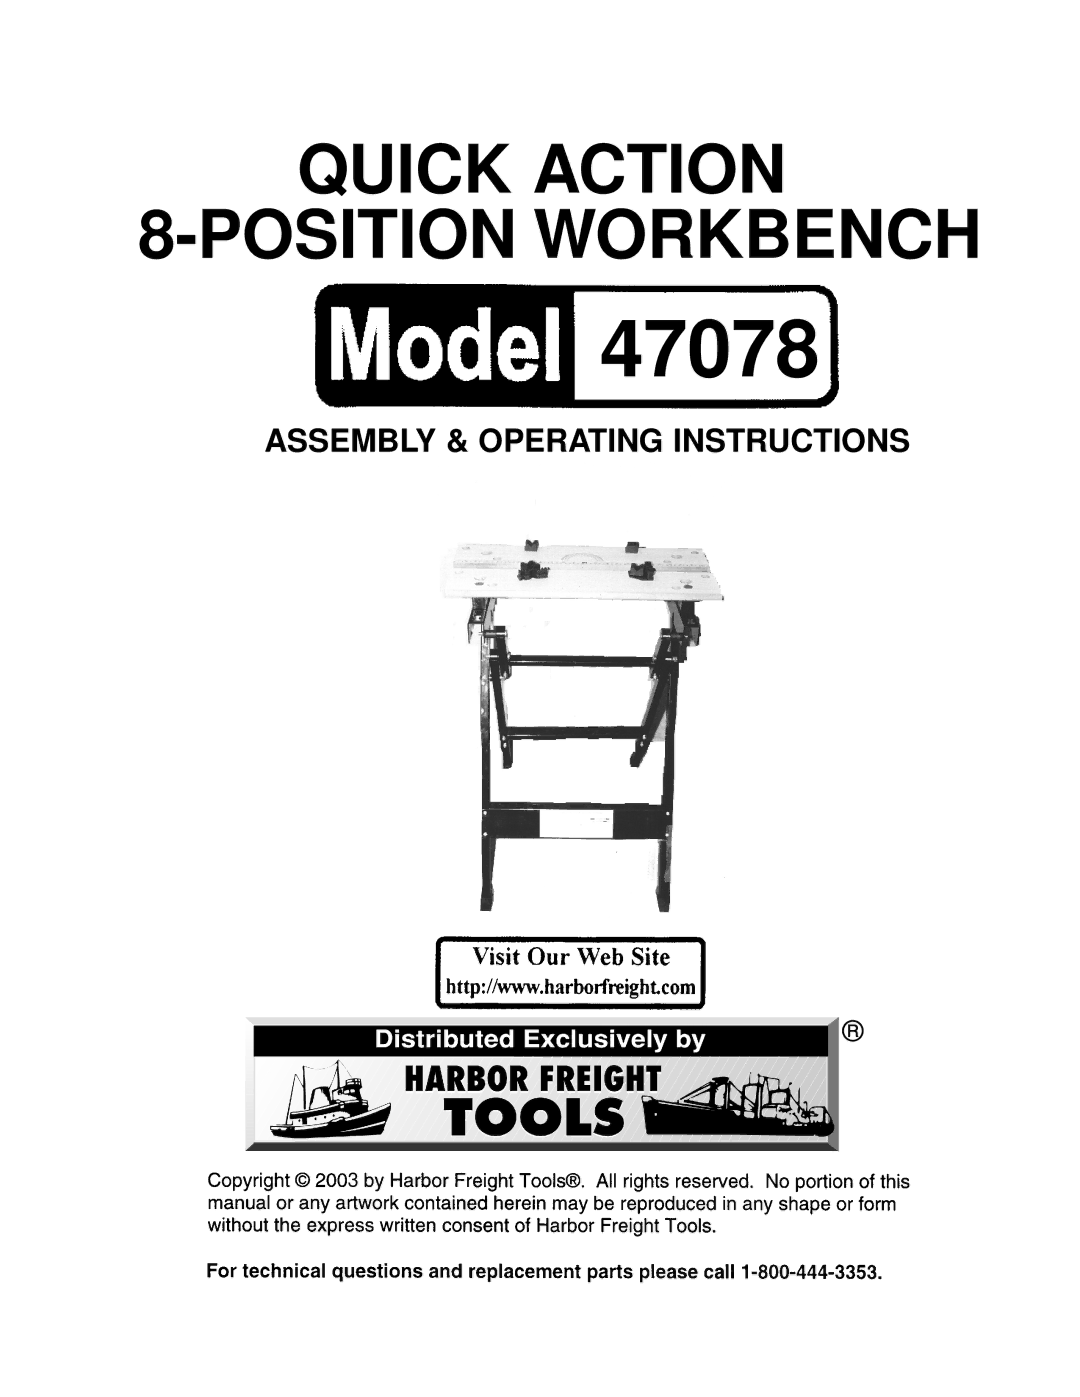 Harbor Freight Tools 47078 operating instructions 